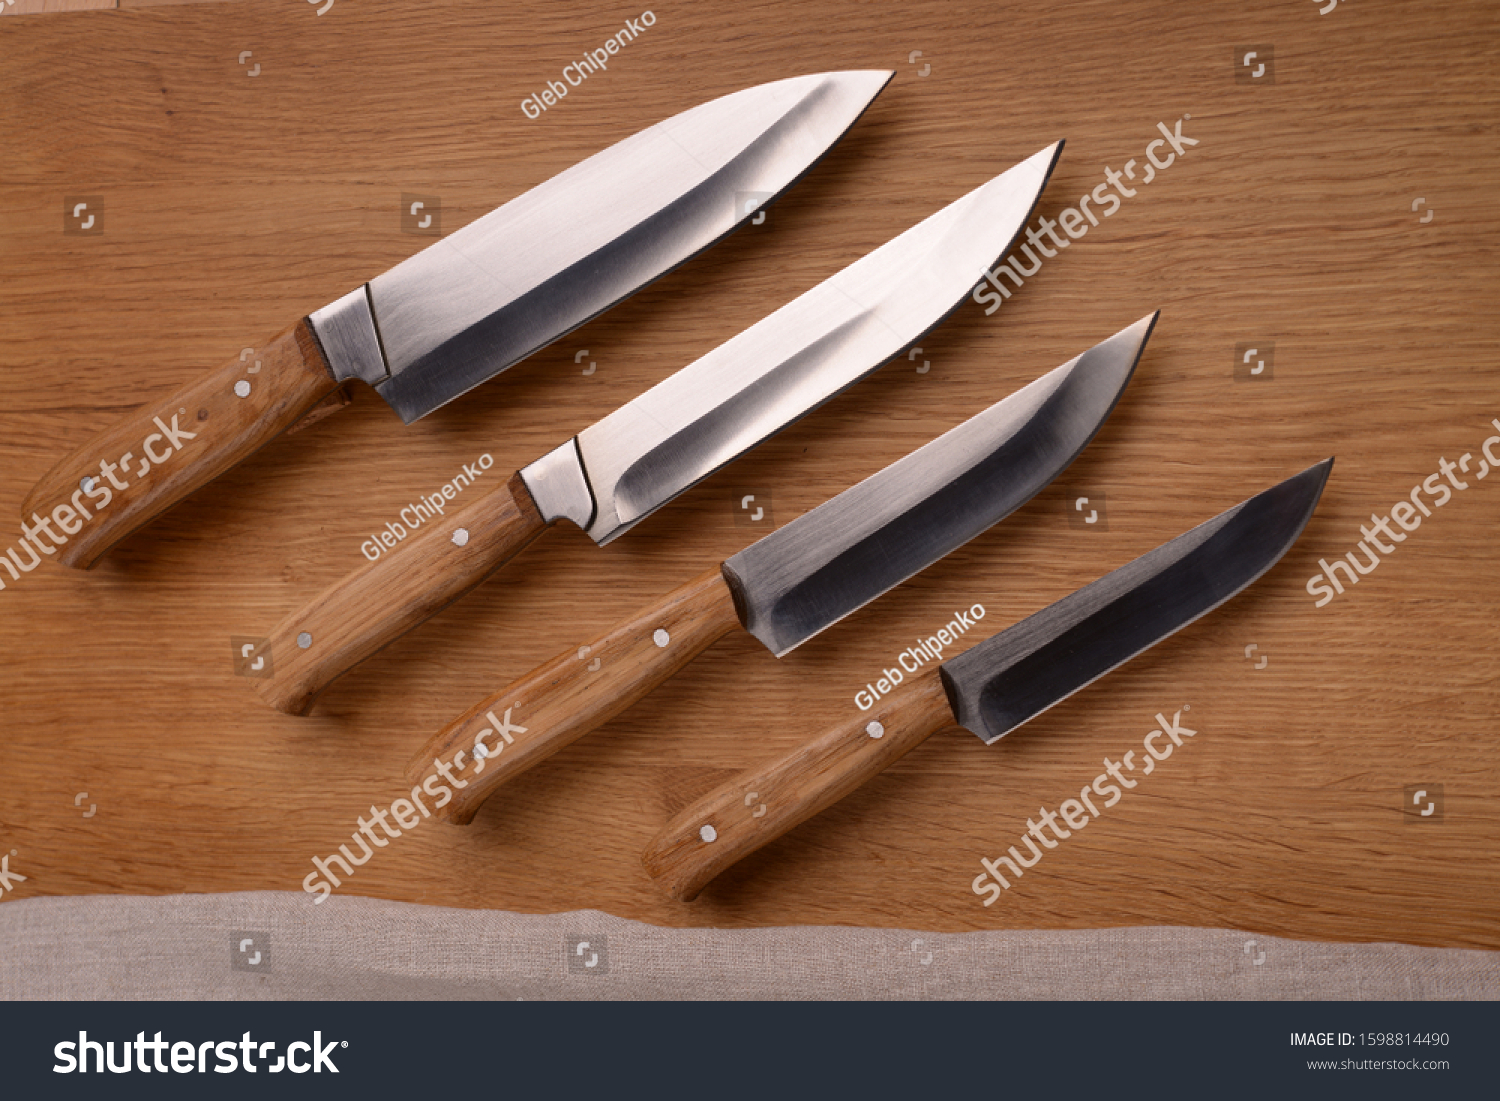 knives with a wooden handle,made of steel, steel, black steel, blades, on the procurement, a set of Japanese, Japanese knives, high-quality steel, kitchen knife. sparkle
 #1598814490